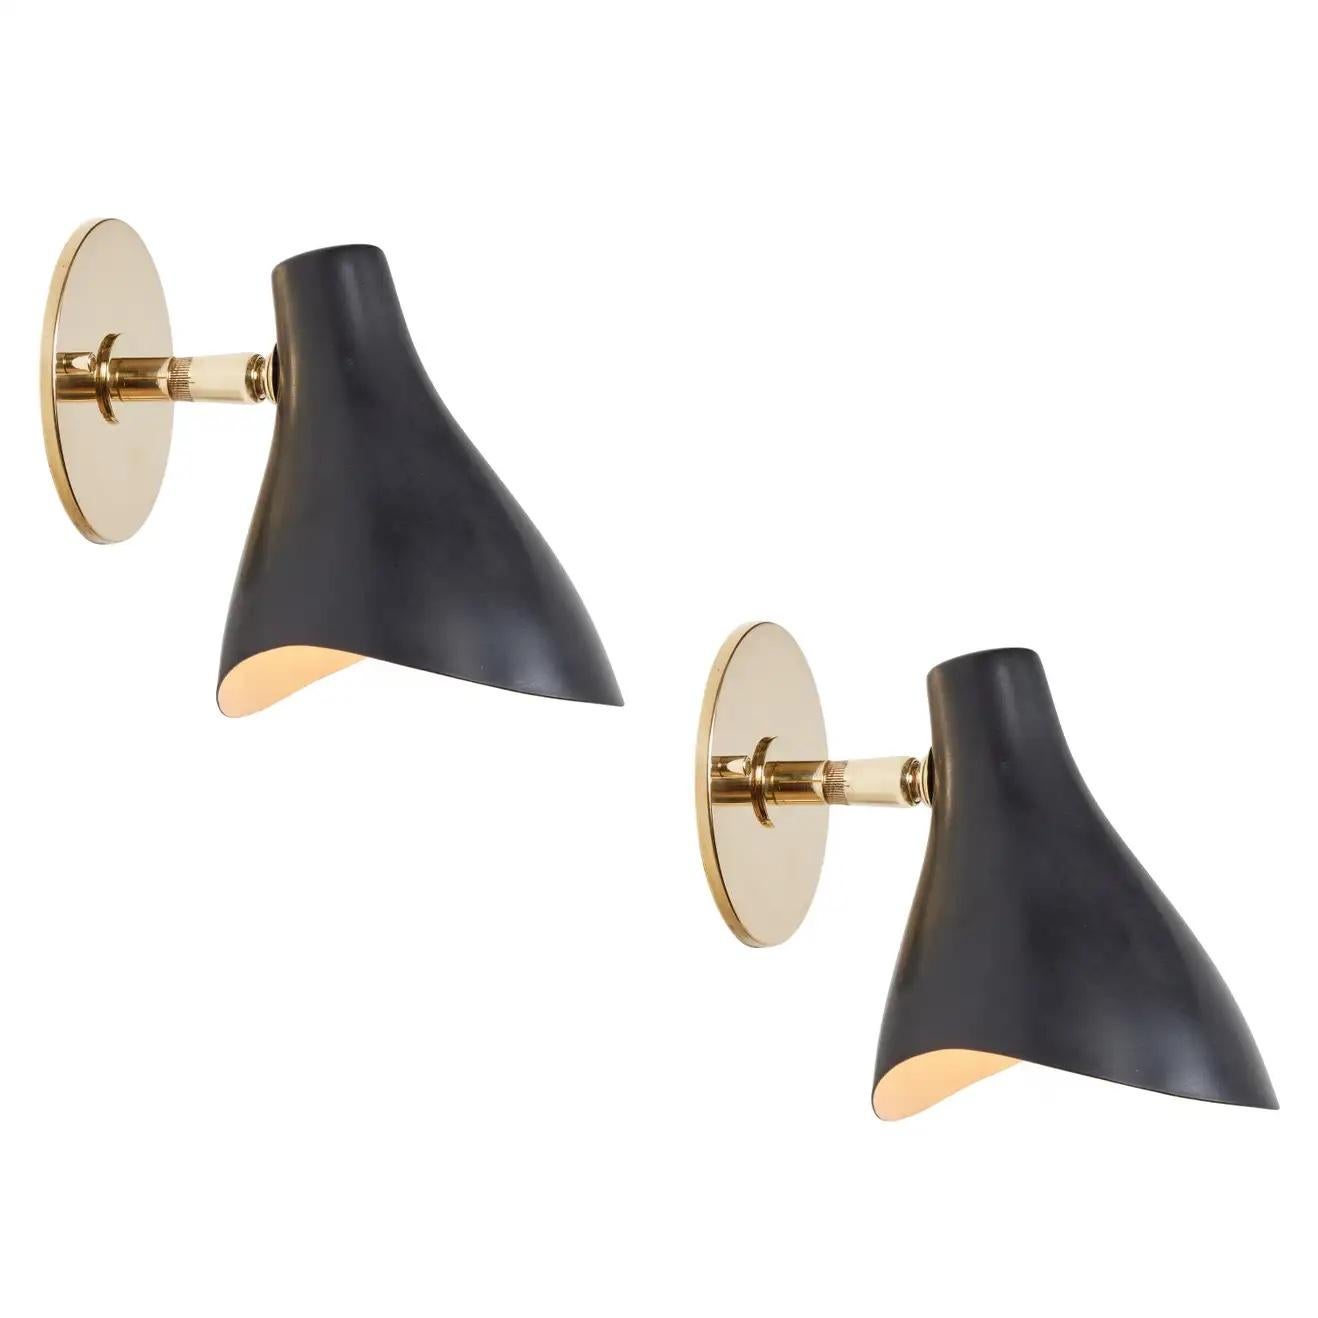 Gino Sarfatti Model #10 sconce in black for Arteluce. Executed in black painted aluminum and custom fabricated period styled brass backplates designed to mount over a standard American j-box for hardwiring. Ball jointed arm allows flexible shade